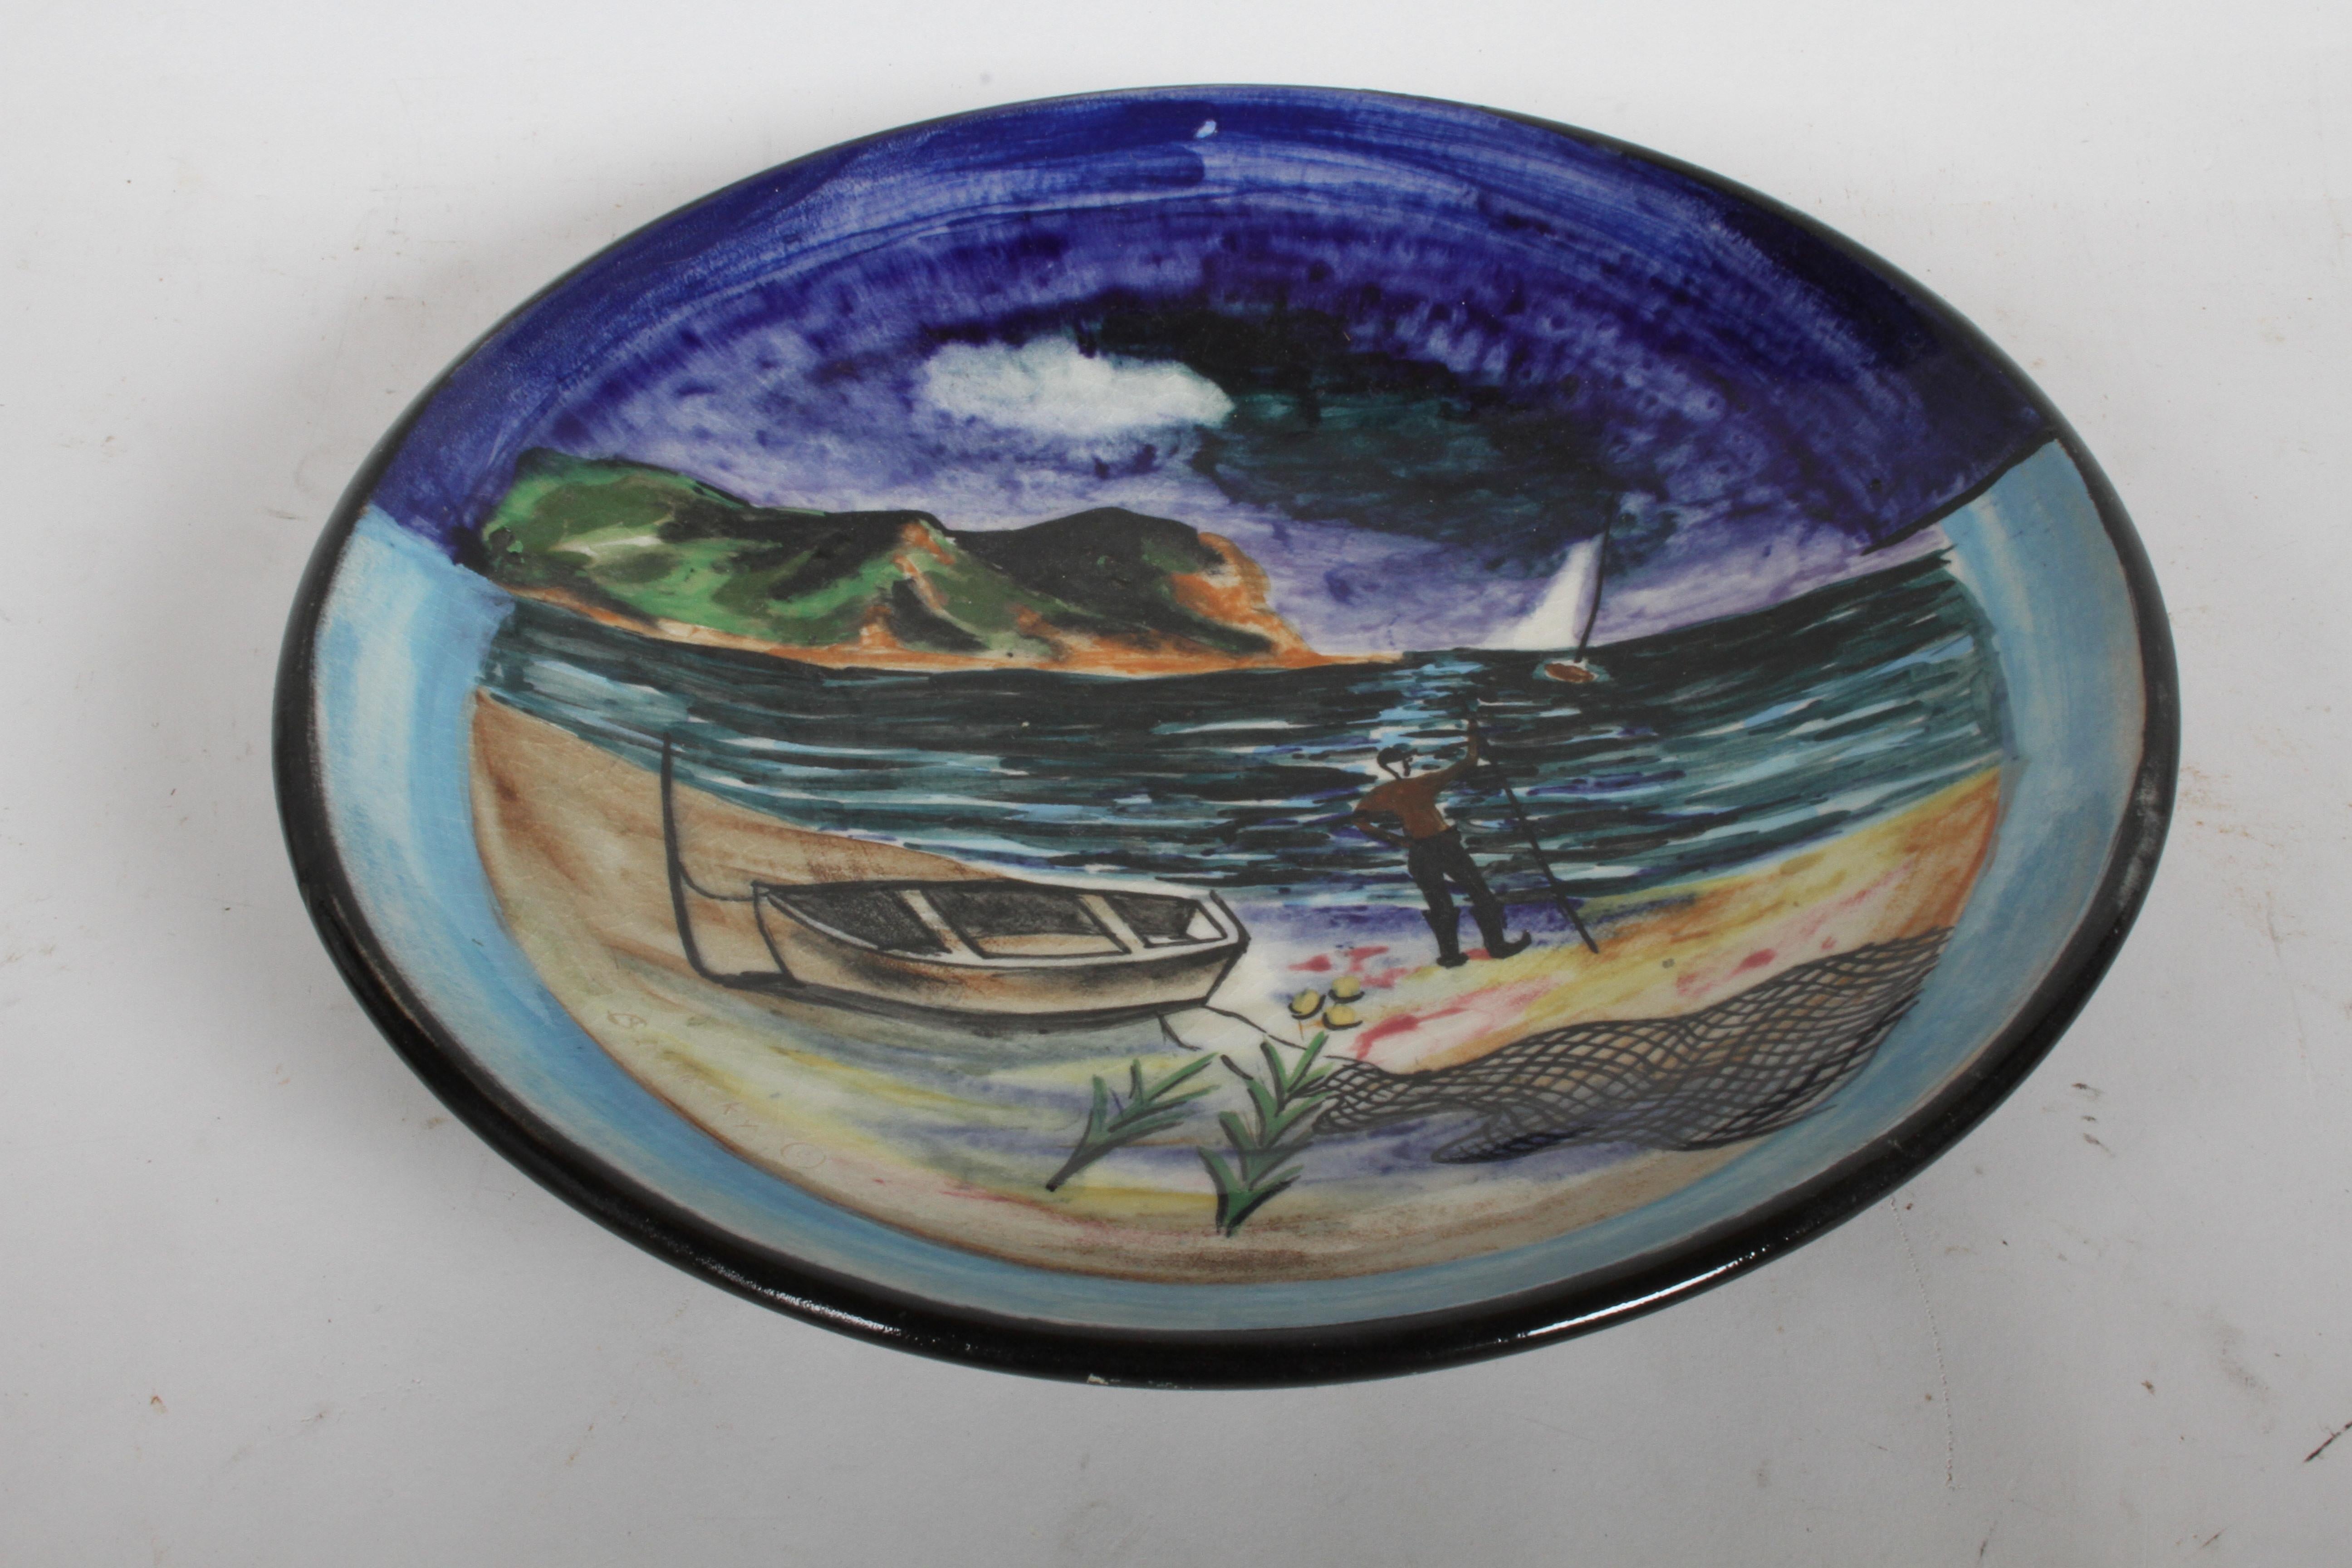 Artist Nicolai Cikovsky (1894-1984) Russian/American, hand painted ceramic charger for Stonelain circa 1940s, part of the (AAA) or Associated American Artists Gallery NYC. Polychrome glaze decoration depicting a East Coast coastal scene with